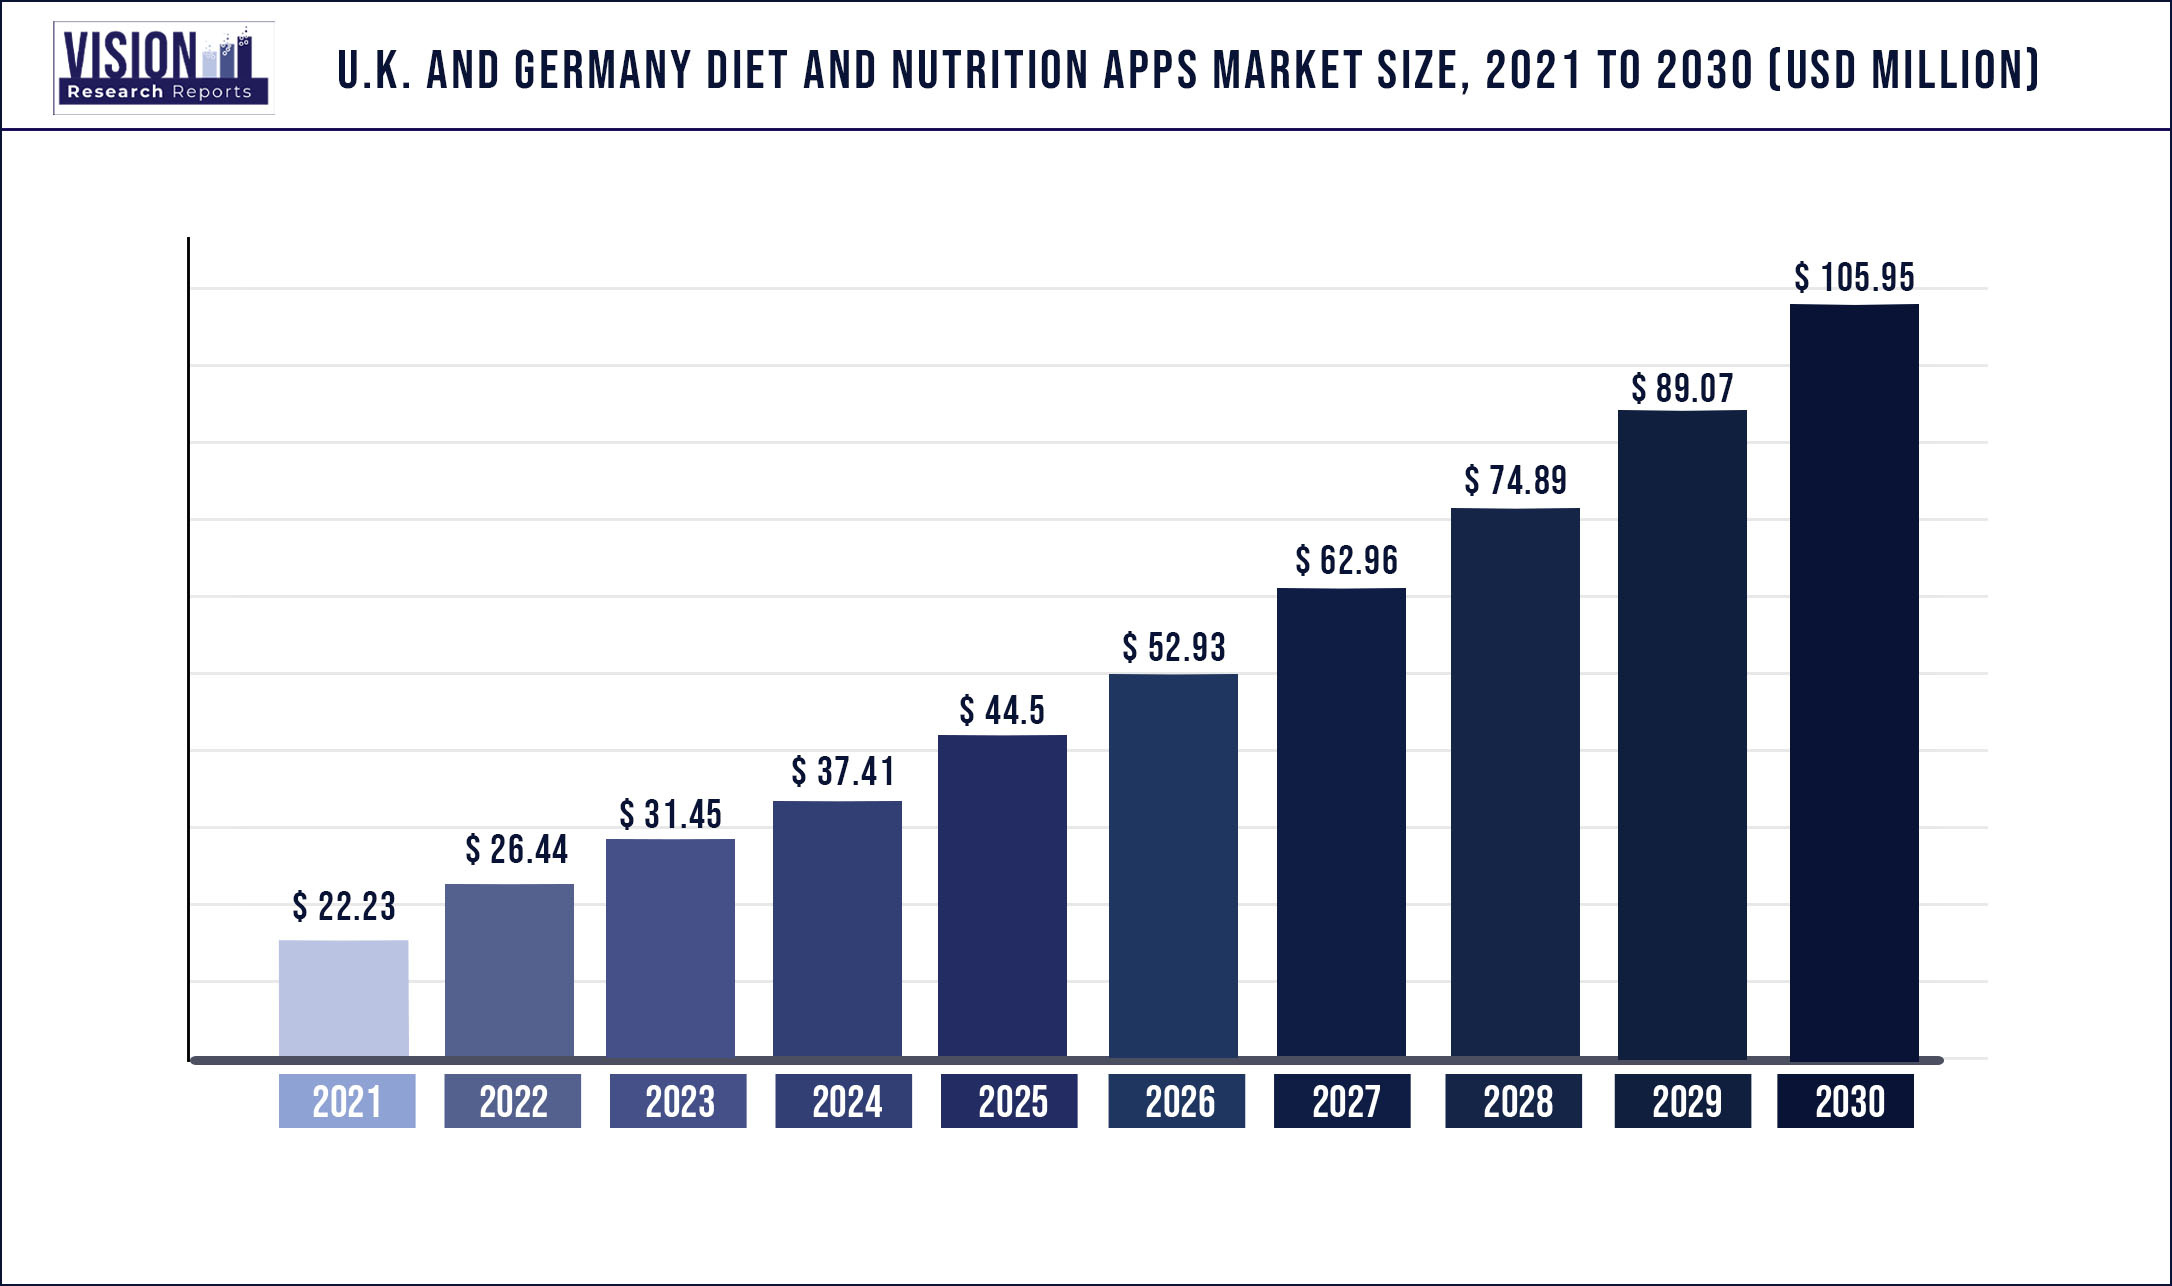 U.K. And Germany Diet And Nutrition Apps Market Size 2021 to 2030